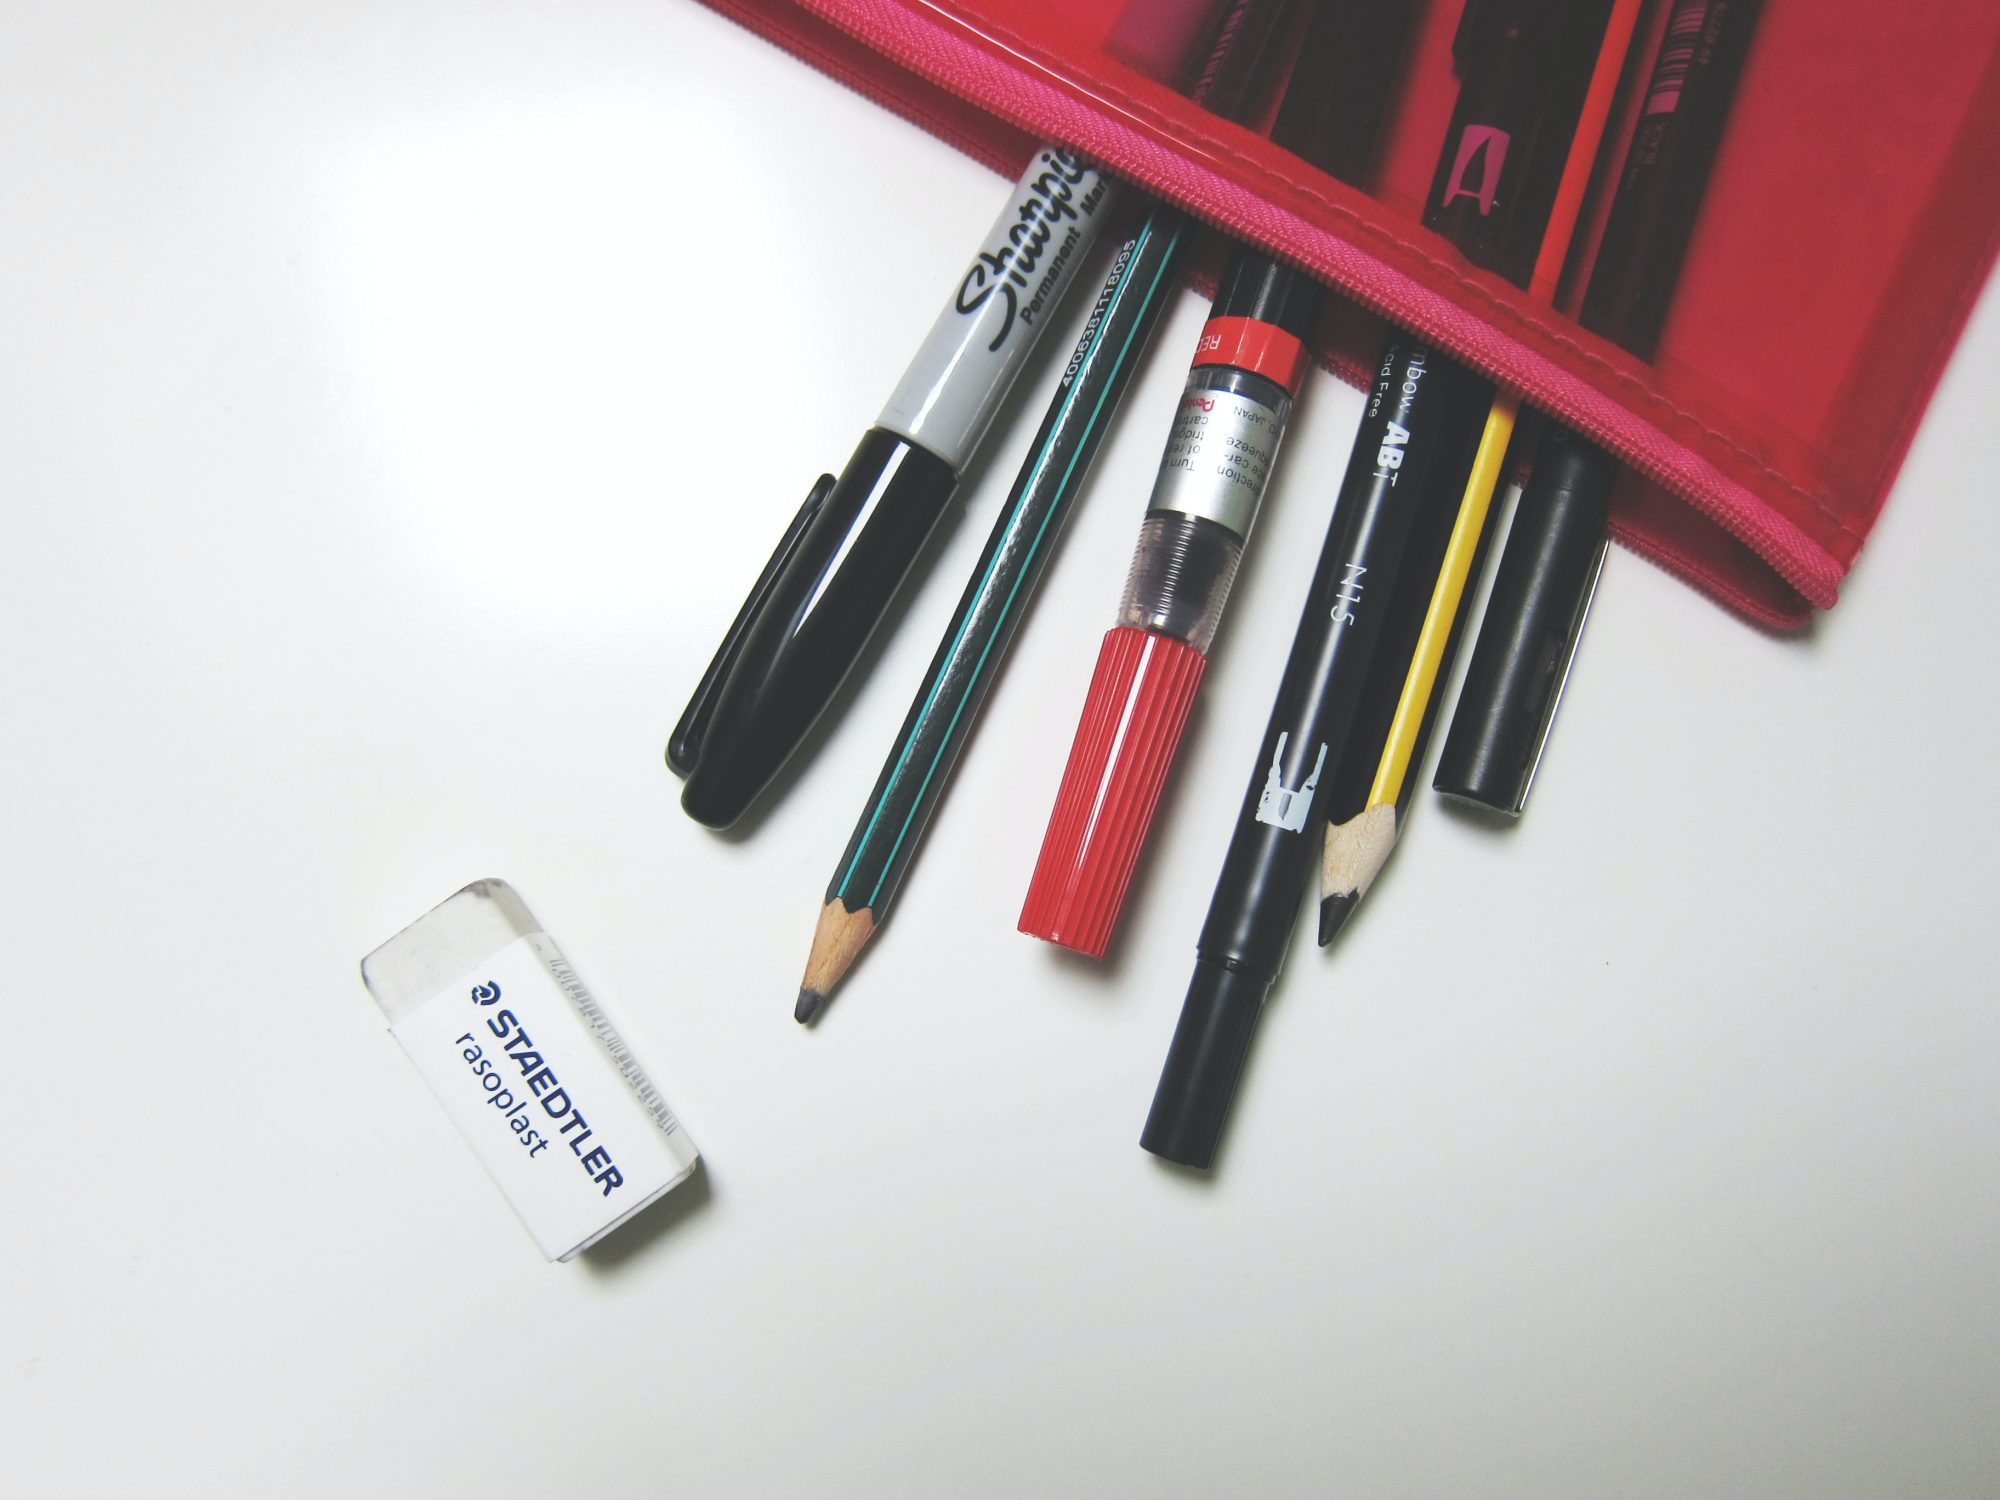 Picture shows a part of a red and black pencil case lying on a white surface with the zip open and pens and pencils spilling out. A white eraser lies next to them.